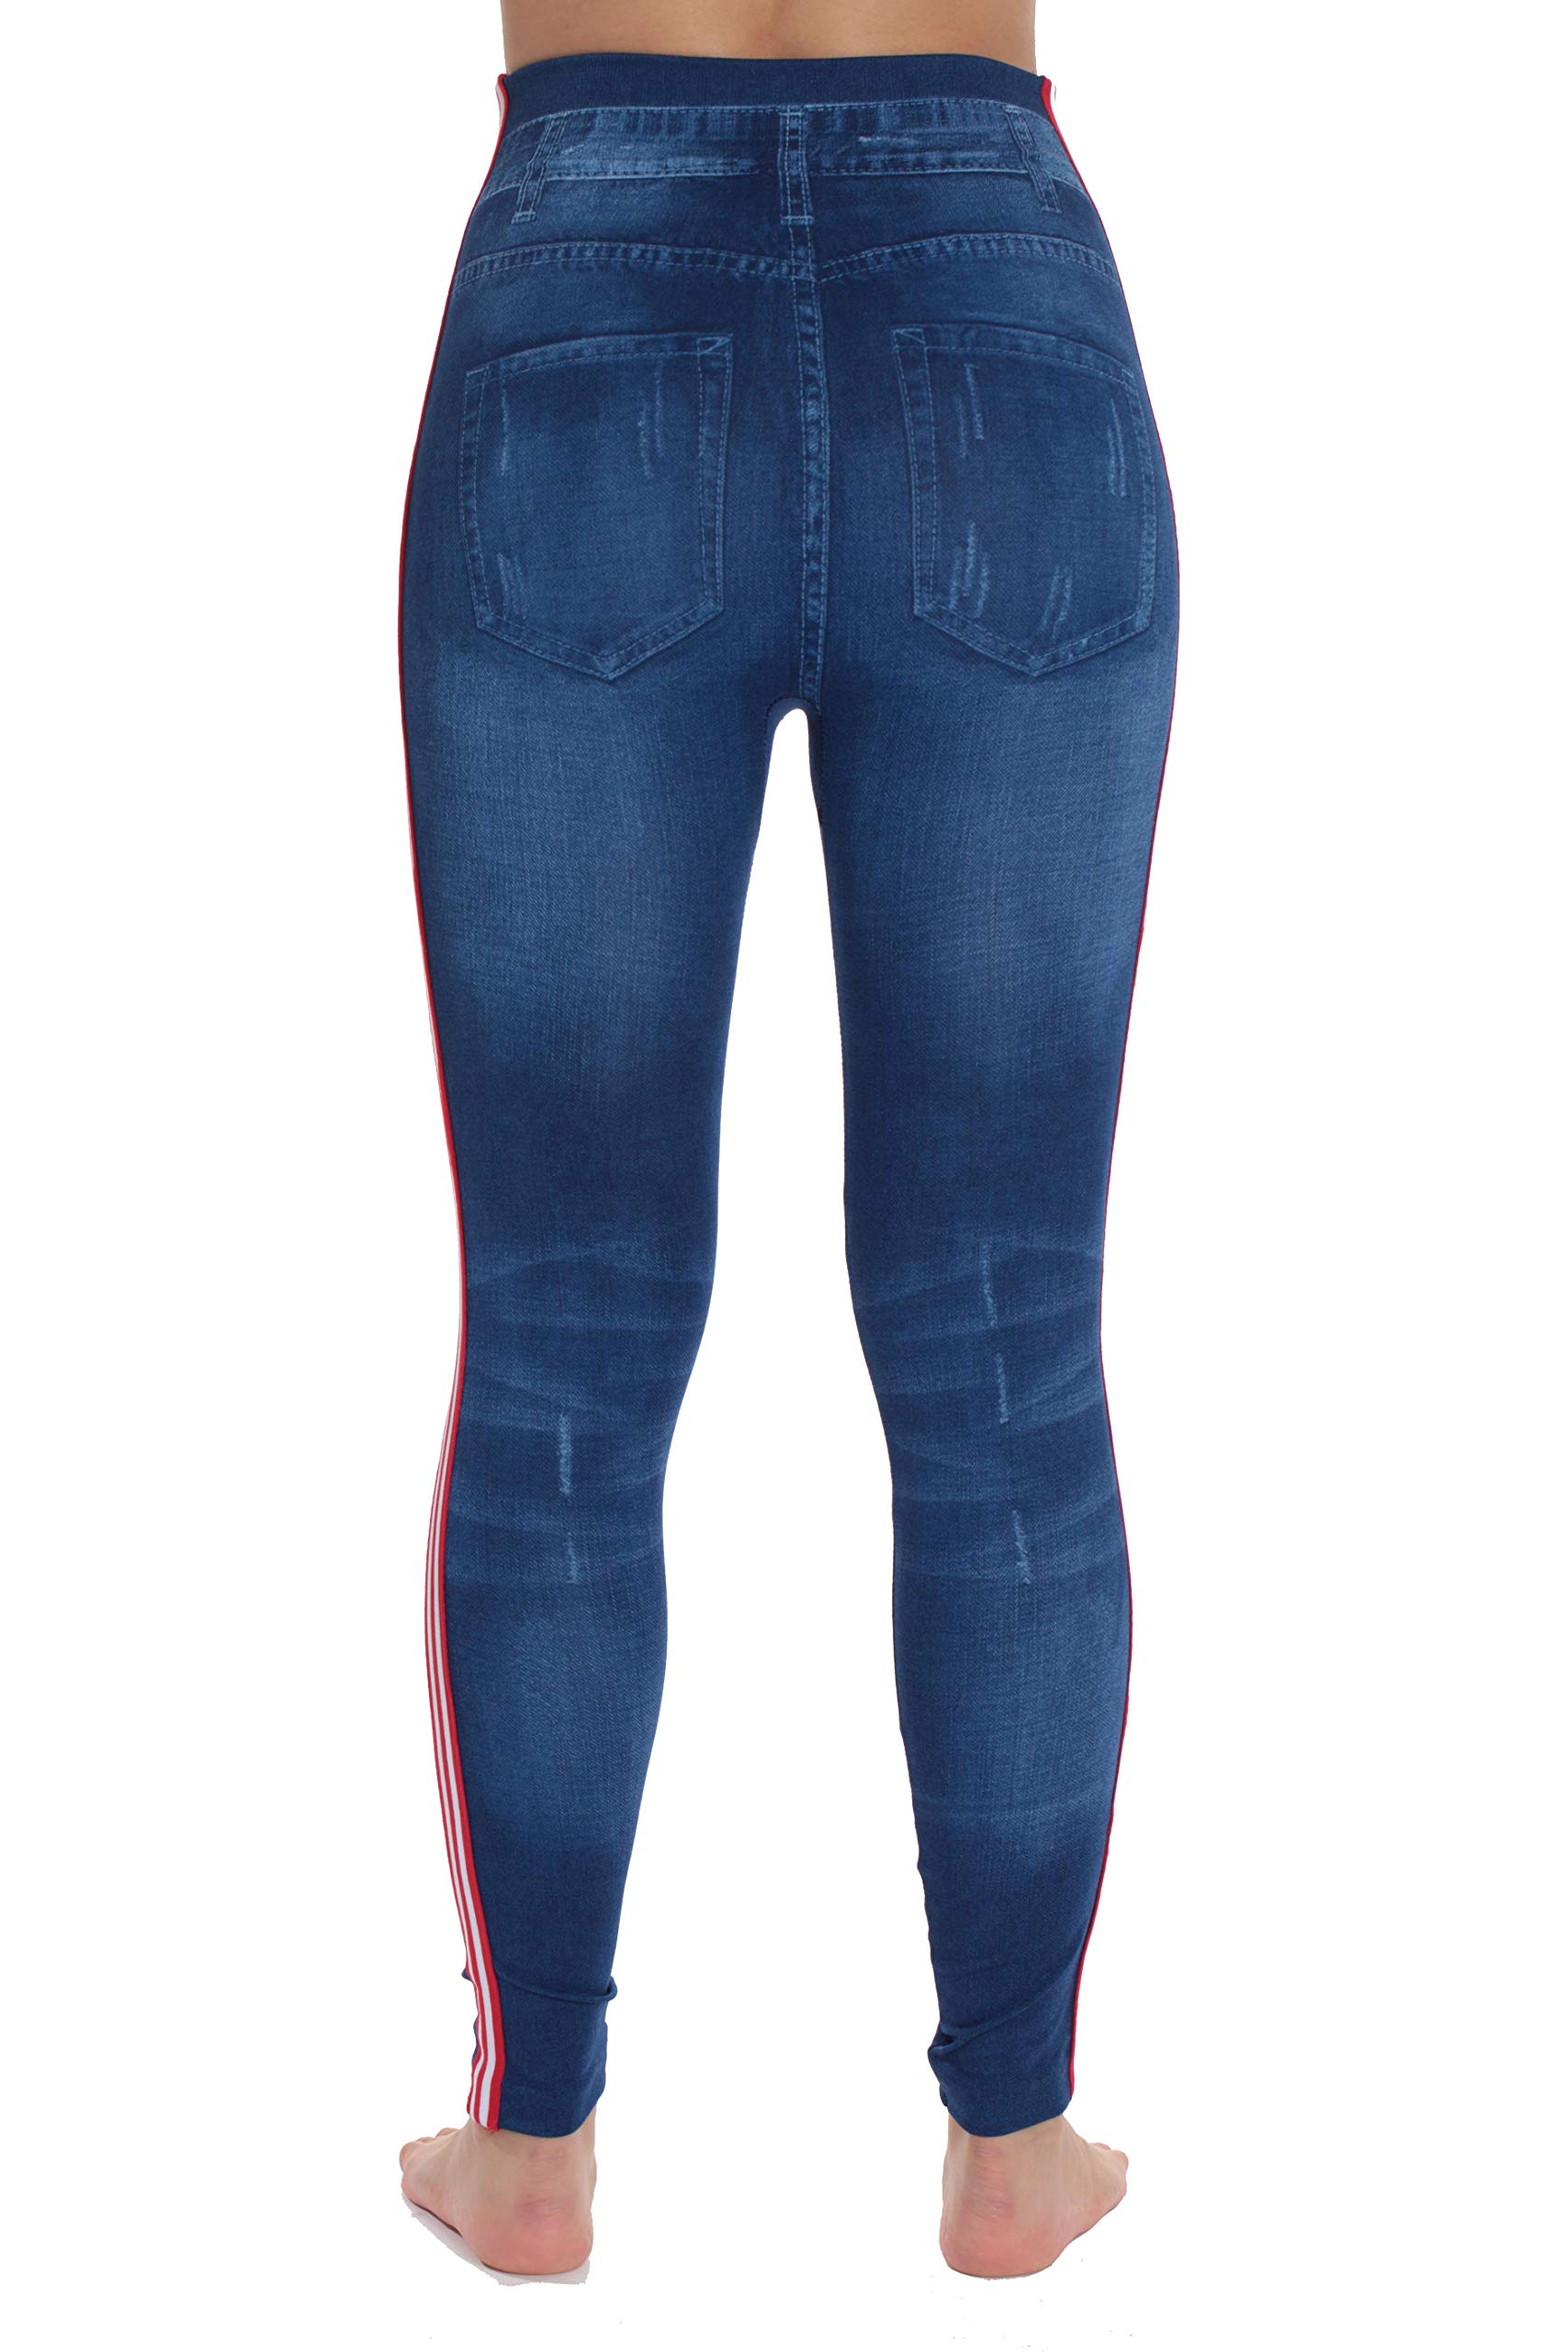 Just Love Women's Denim Wash Leggings - Stretchy and Comfortable Skinny Pants (Blue Striped, Small - Medium) - image 3 of 3